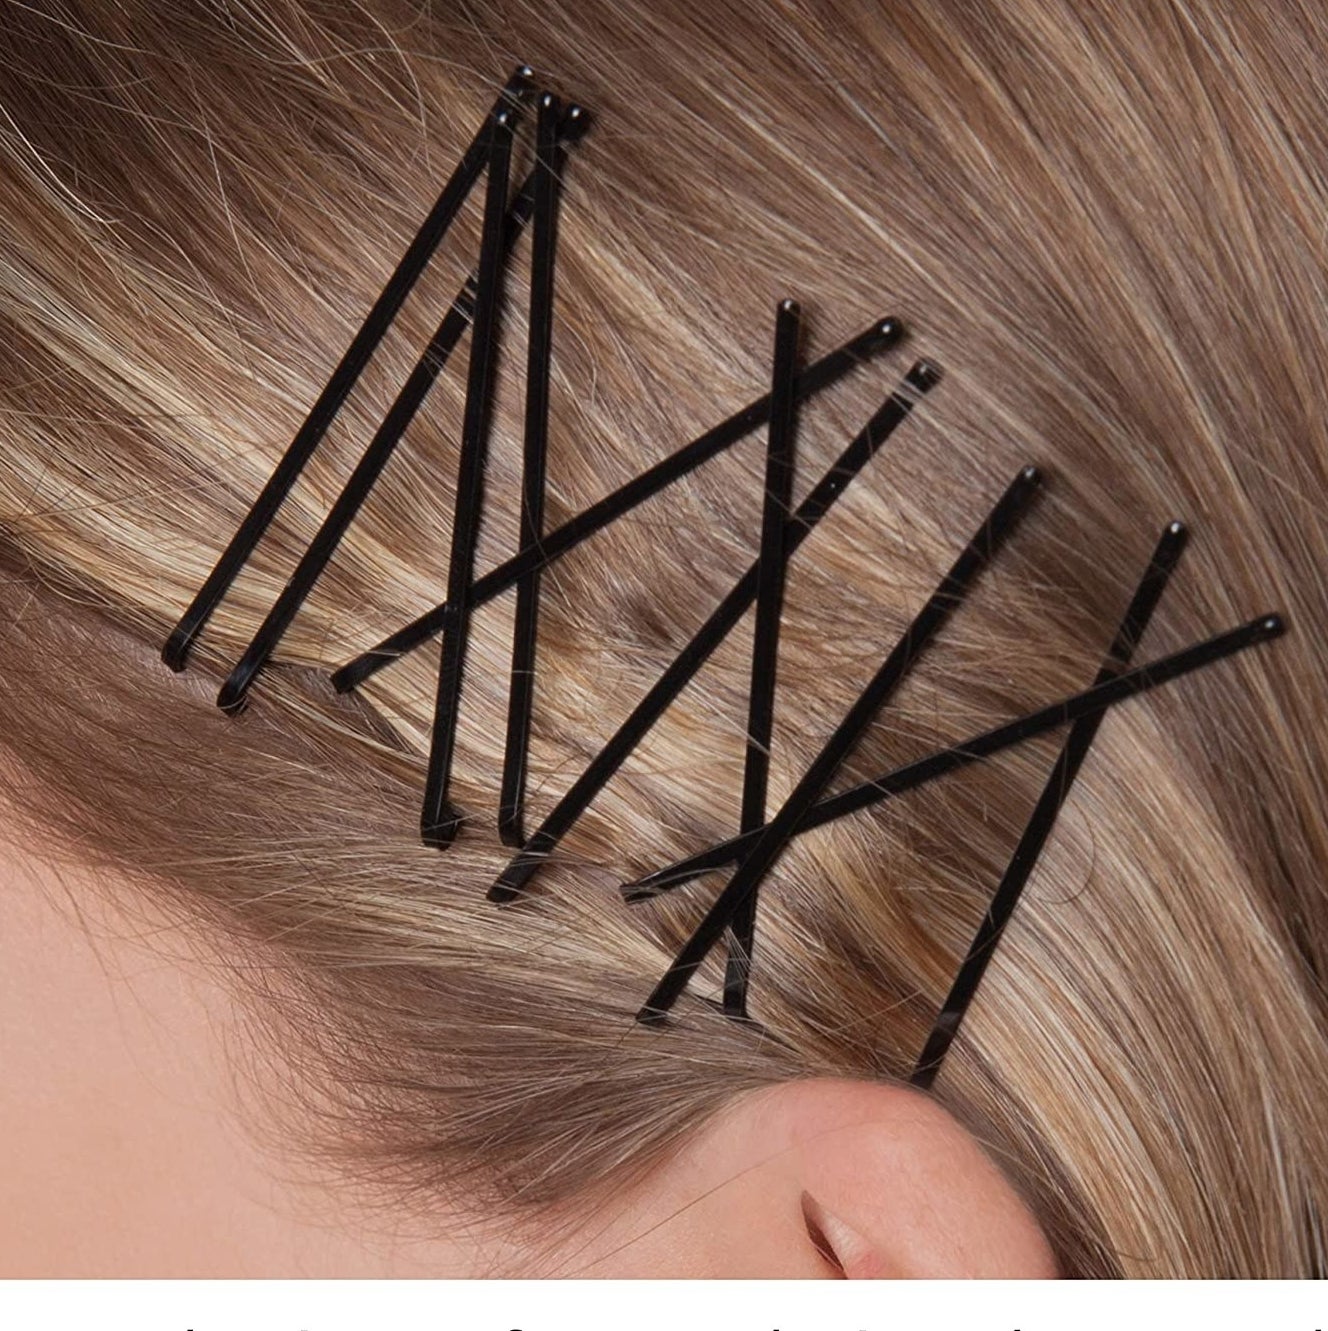 A person with several bobby pins in their hair